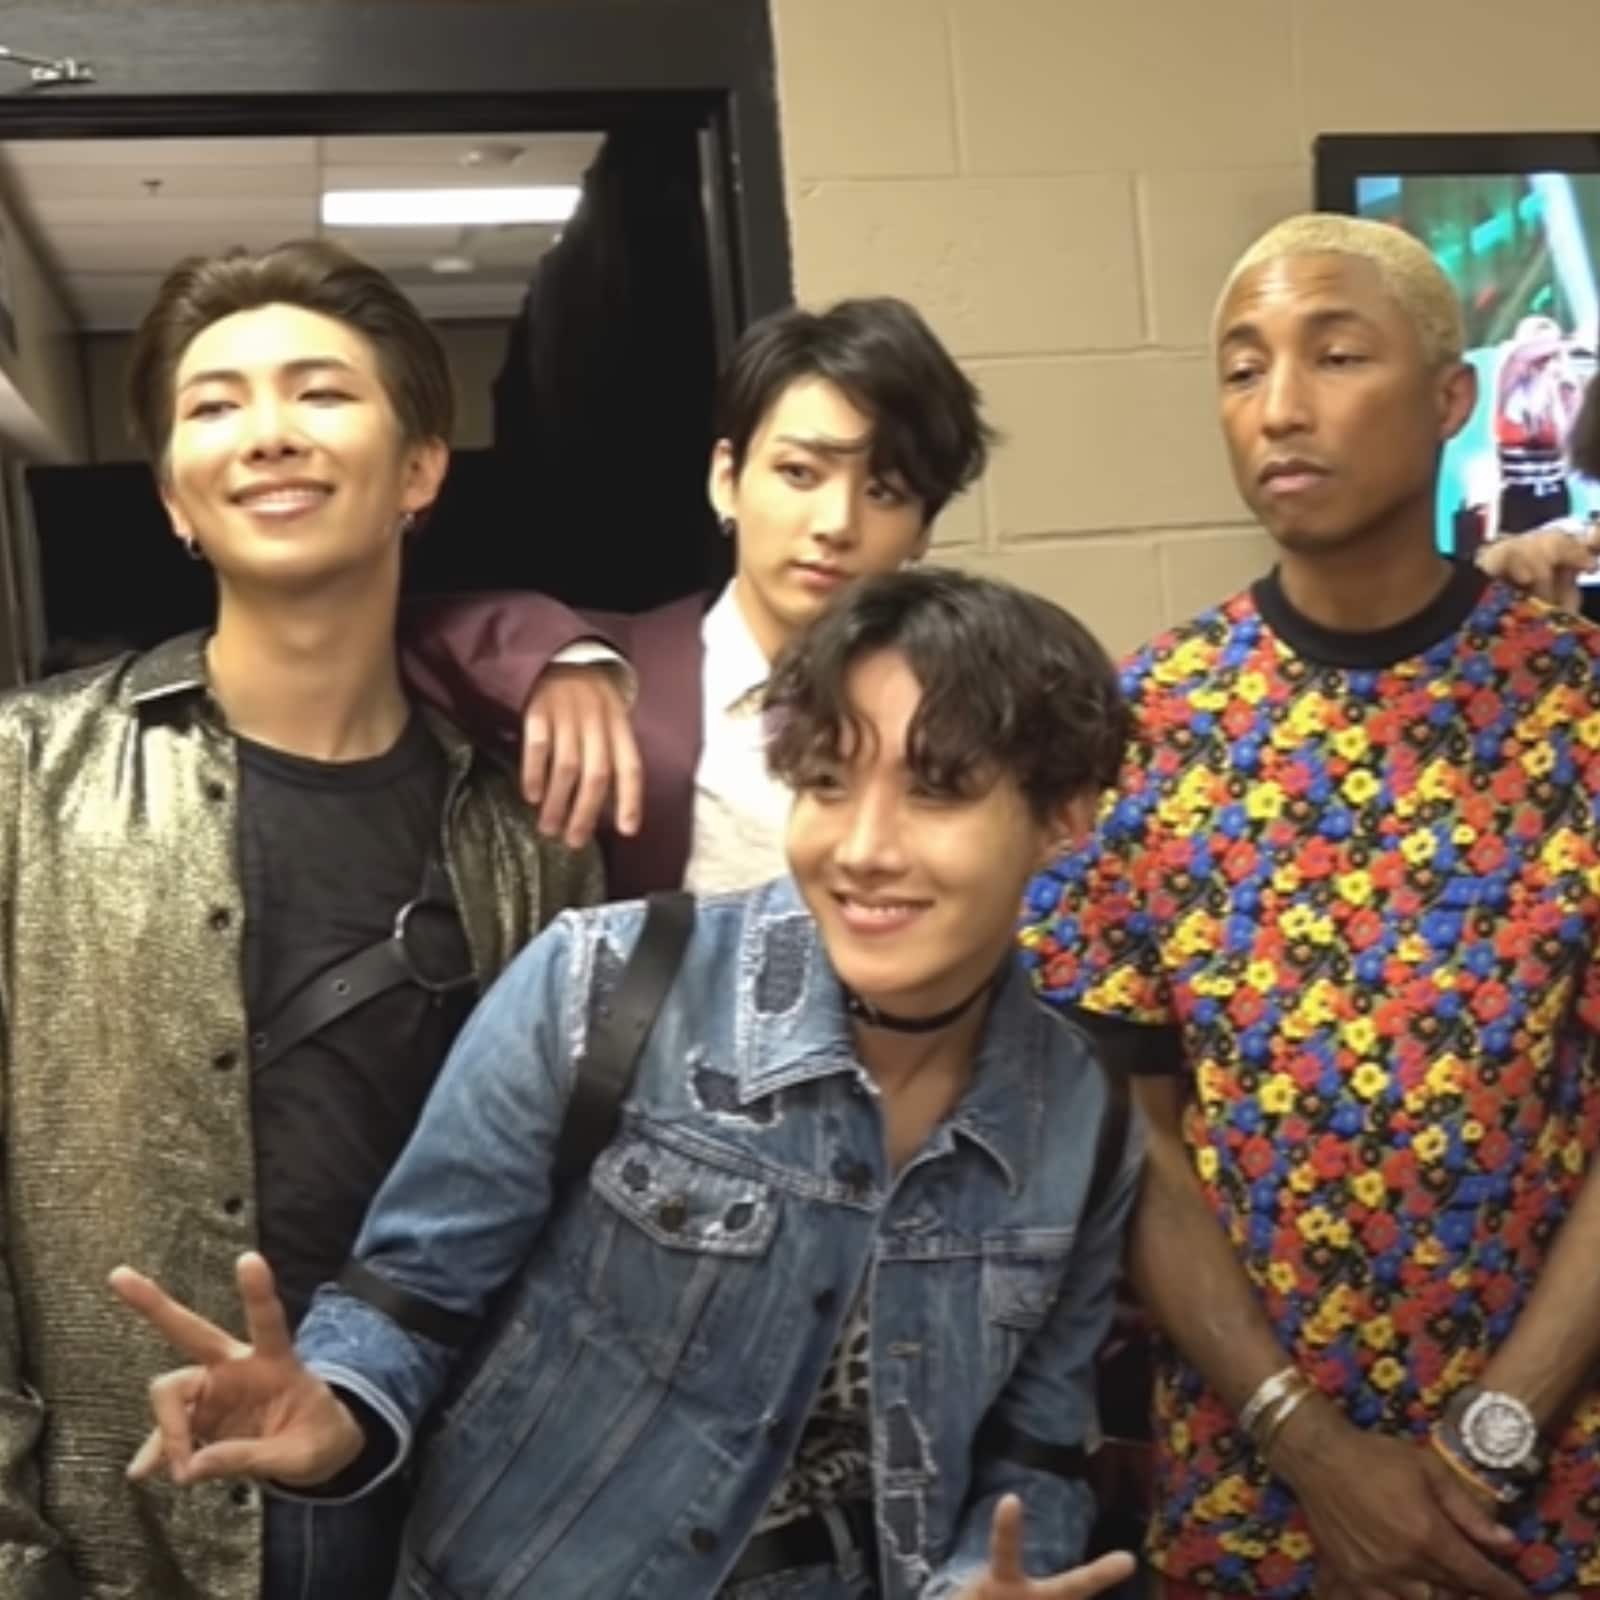 BTS: RM aka Kim Namjoon and Jungkook to attend Grammys 2023 together?